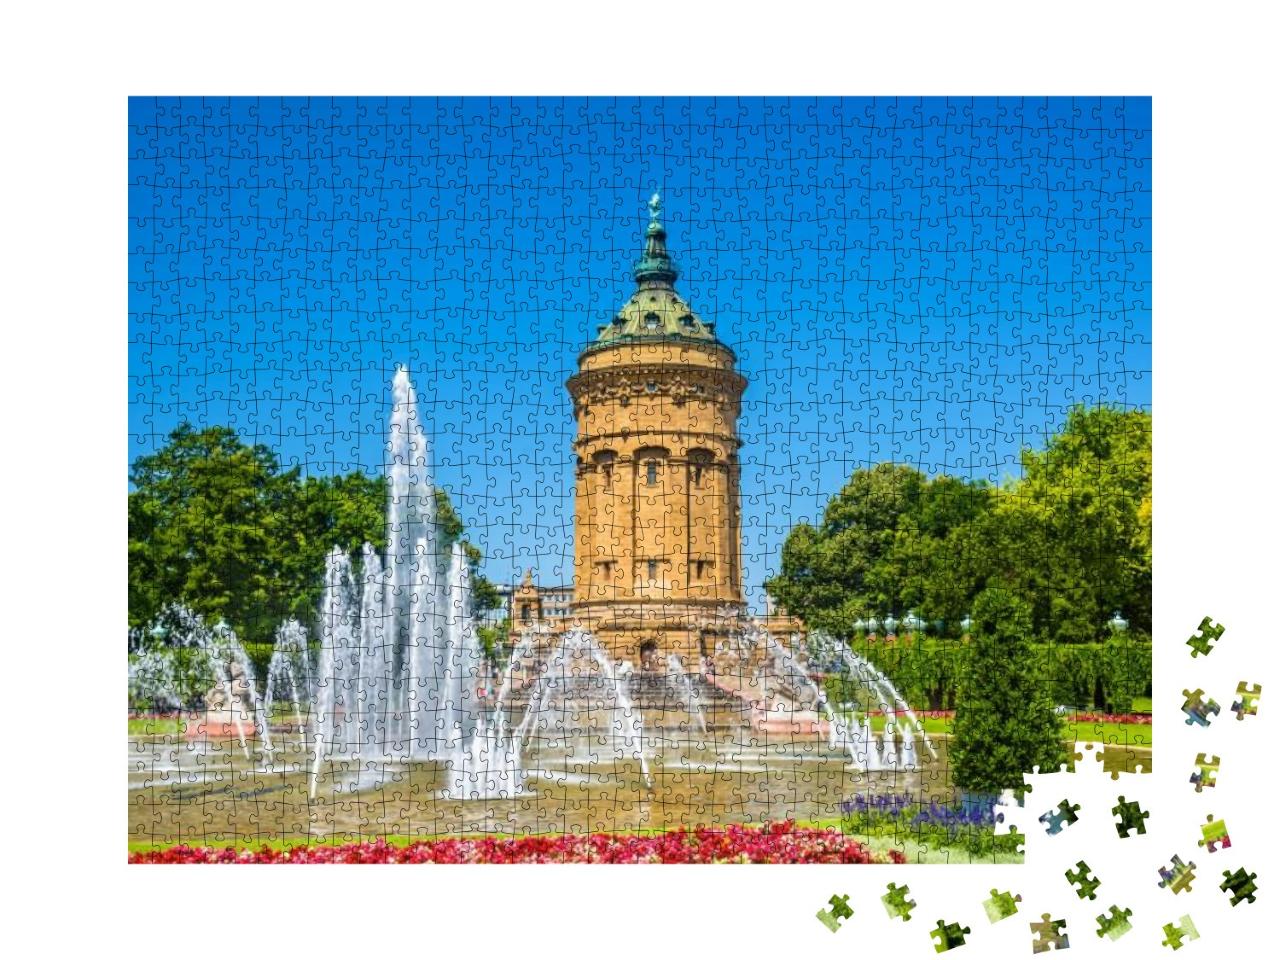 Fountain & Water Tower on Friedrichsplatz Square in Mannh... Jigsaw Puzzle with 1000 pieces